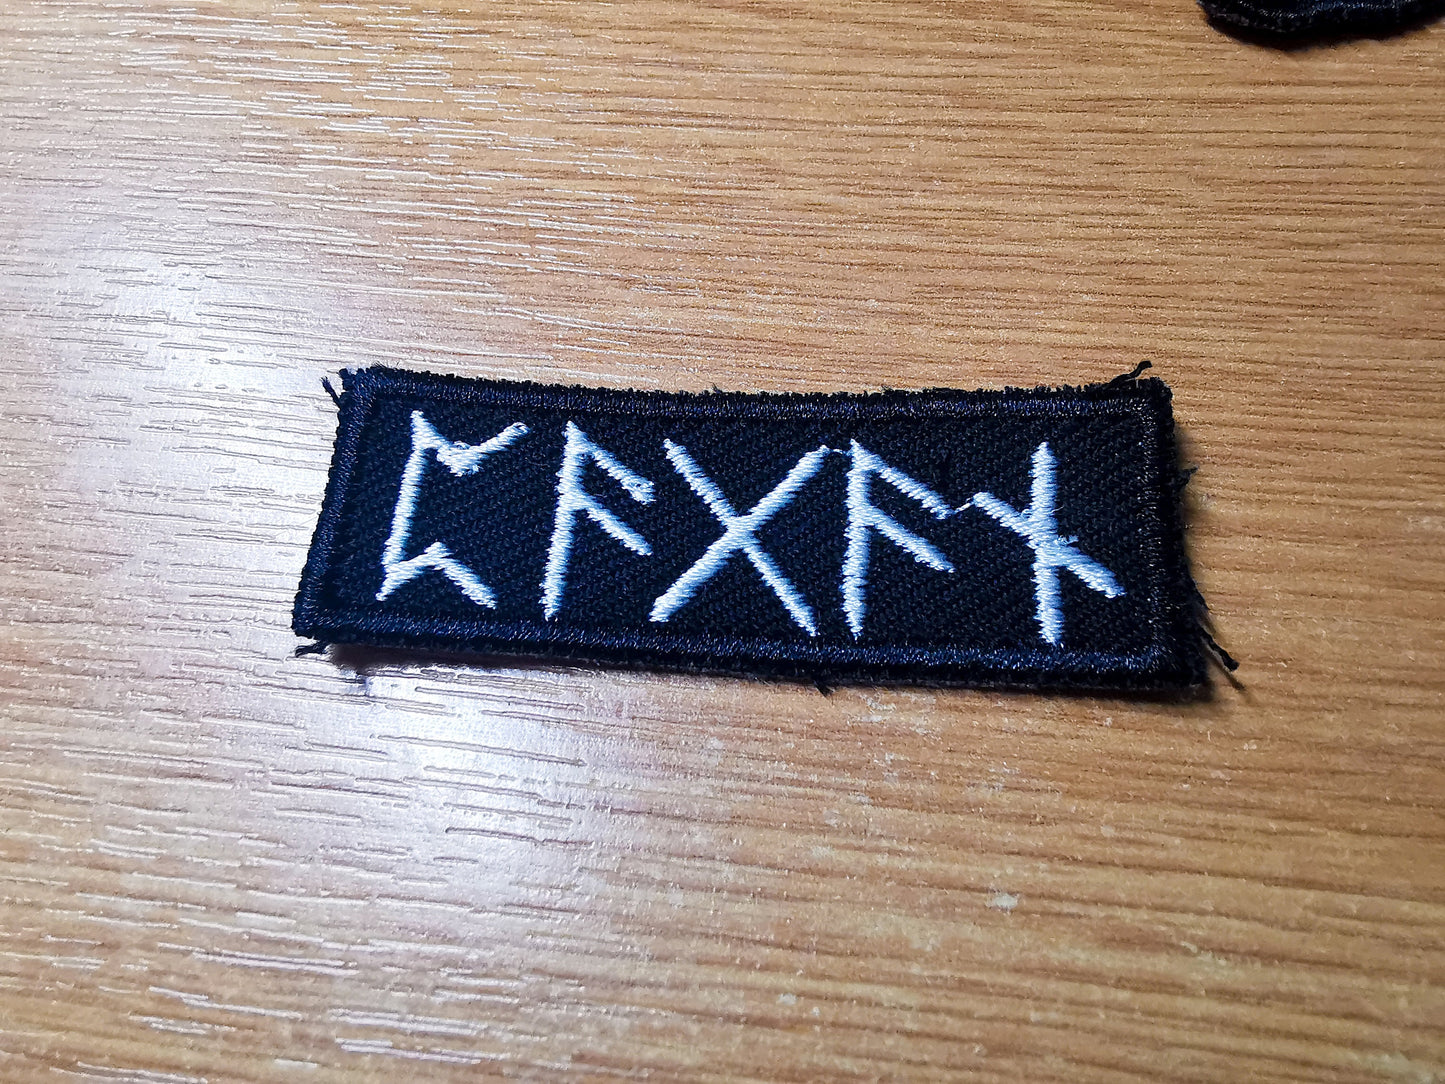 Pagan in Runes SMALL Iron On Embroidered Patch Norse Mythology Viking Black Metal style patch